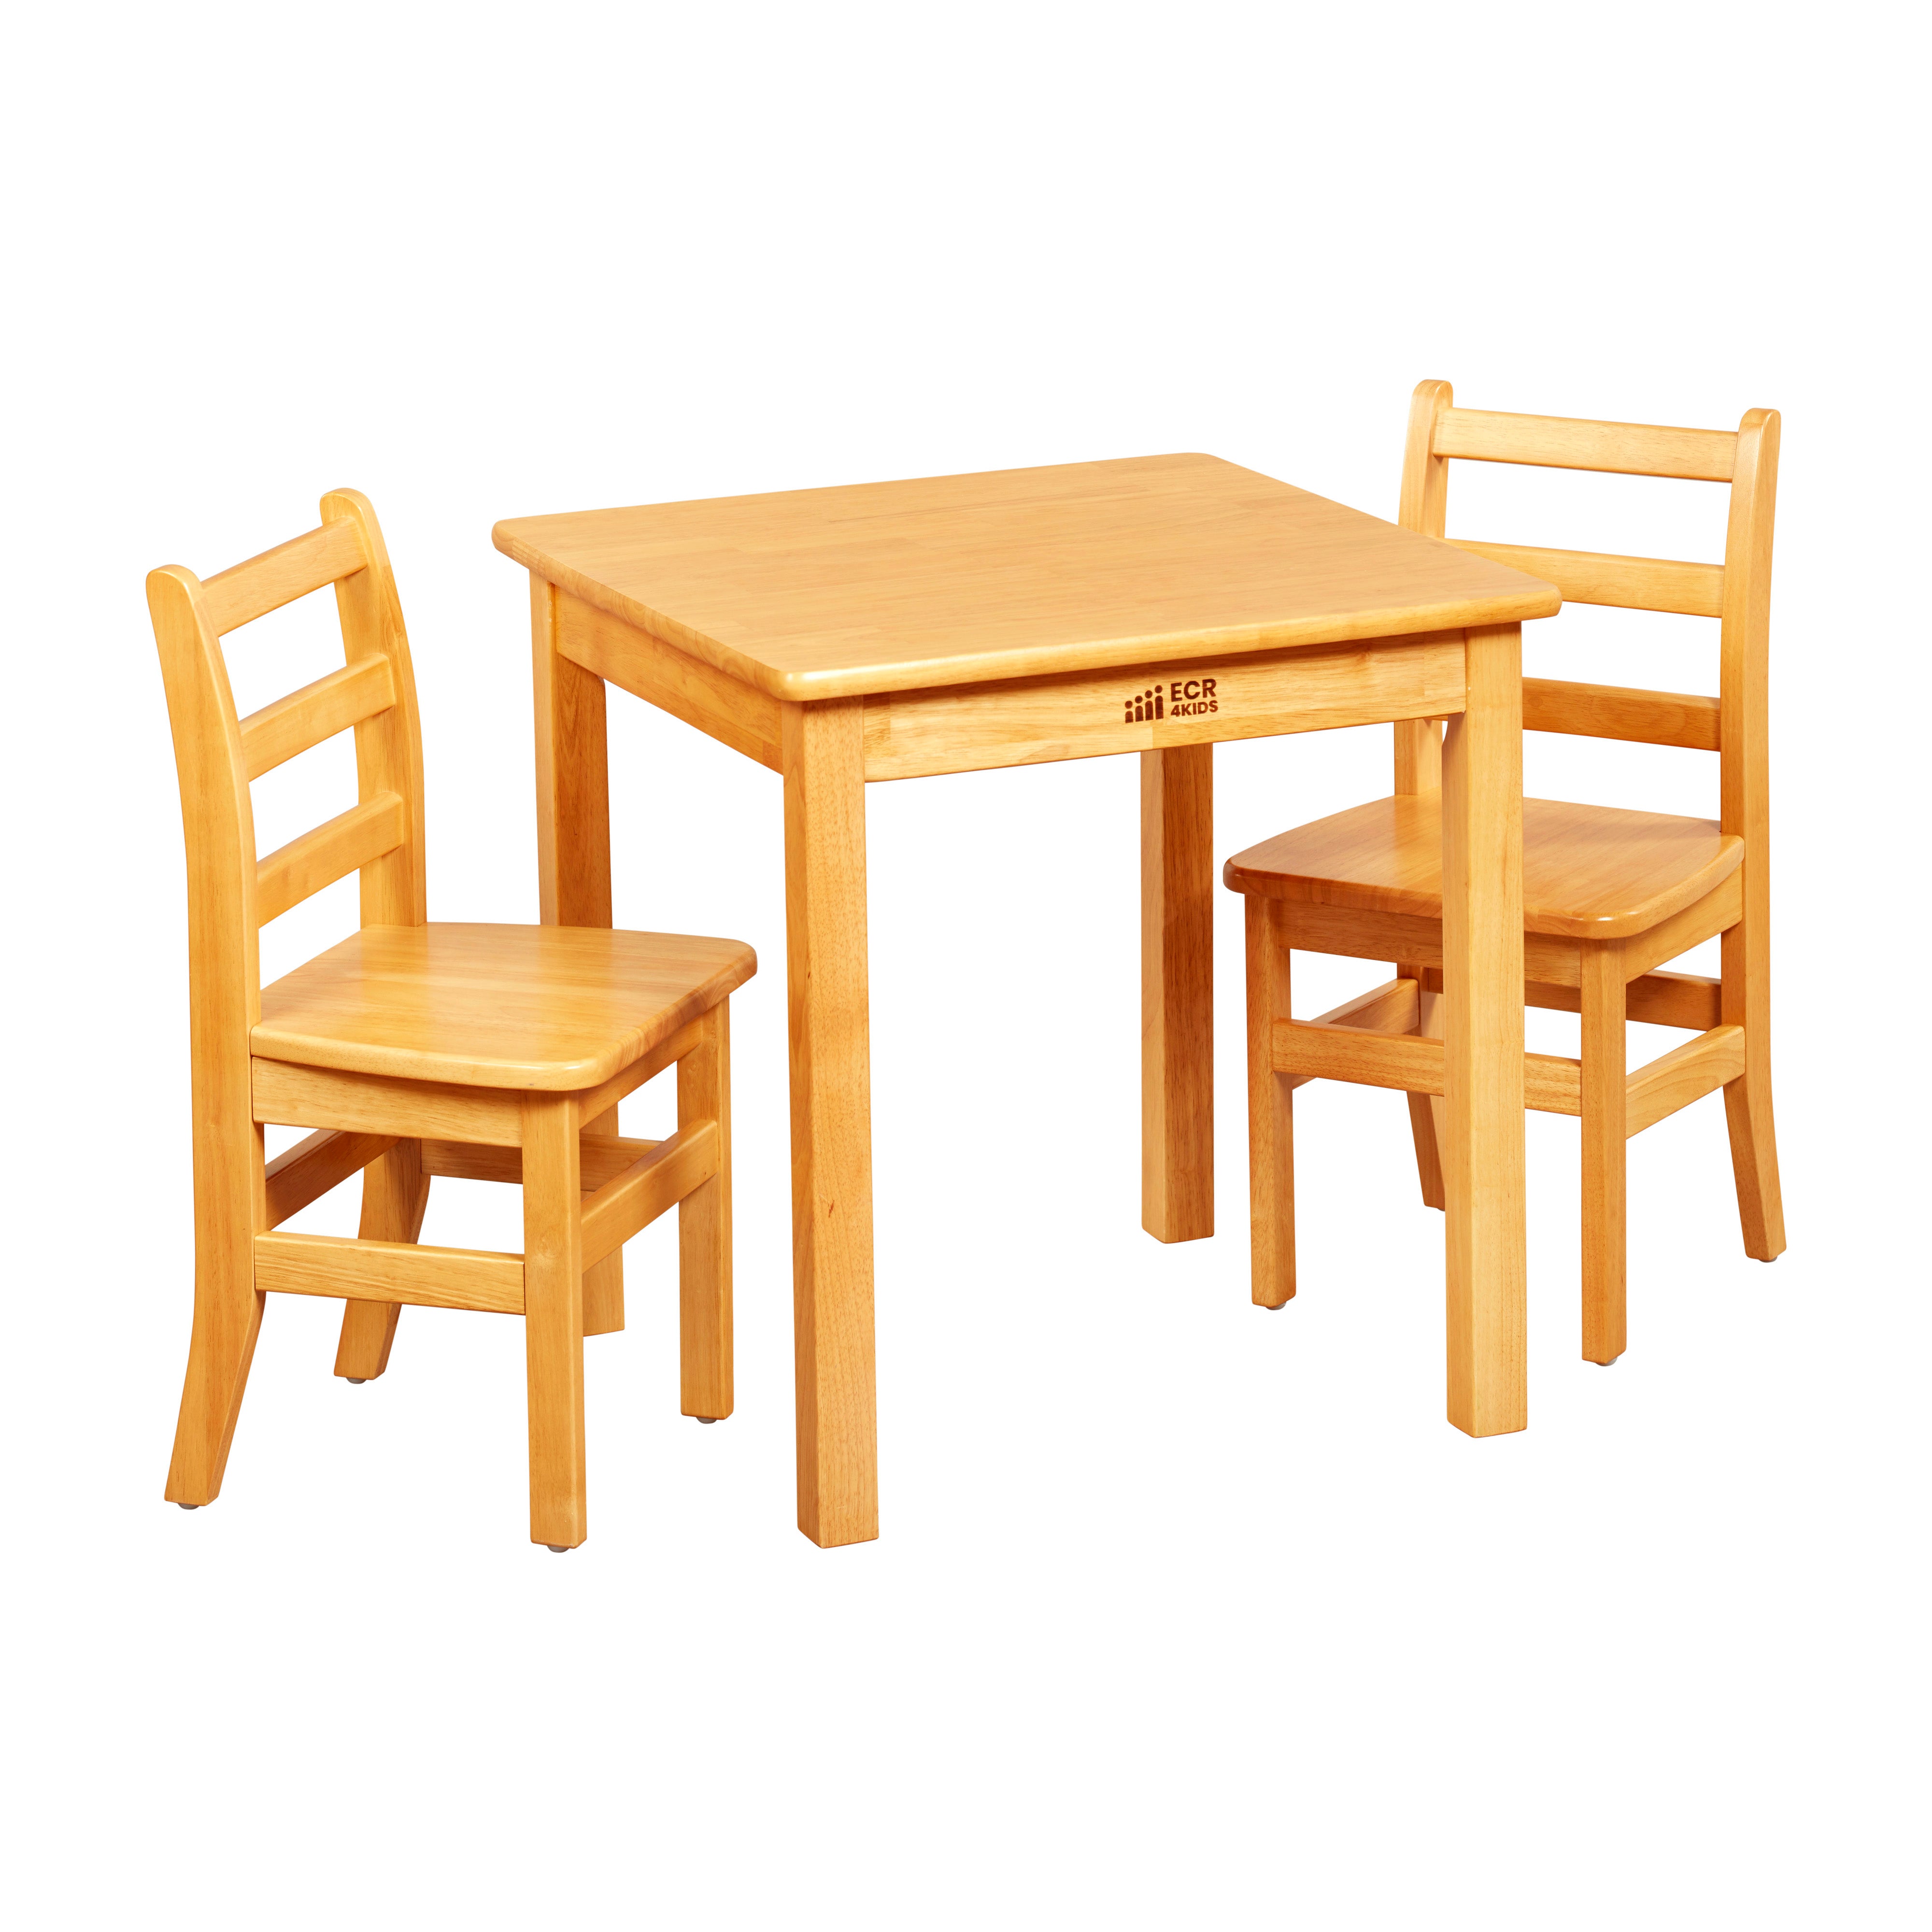 Hardwood Table with 24in Legs and Two 14in Chairs, Kids Furniture